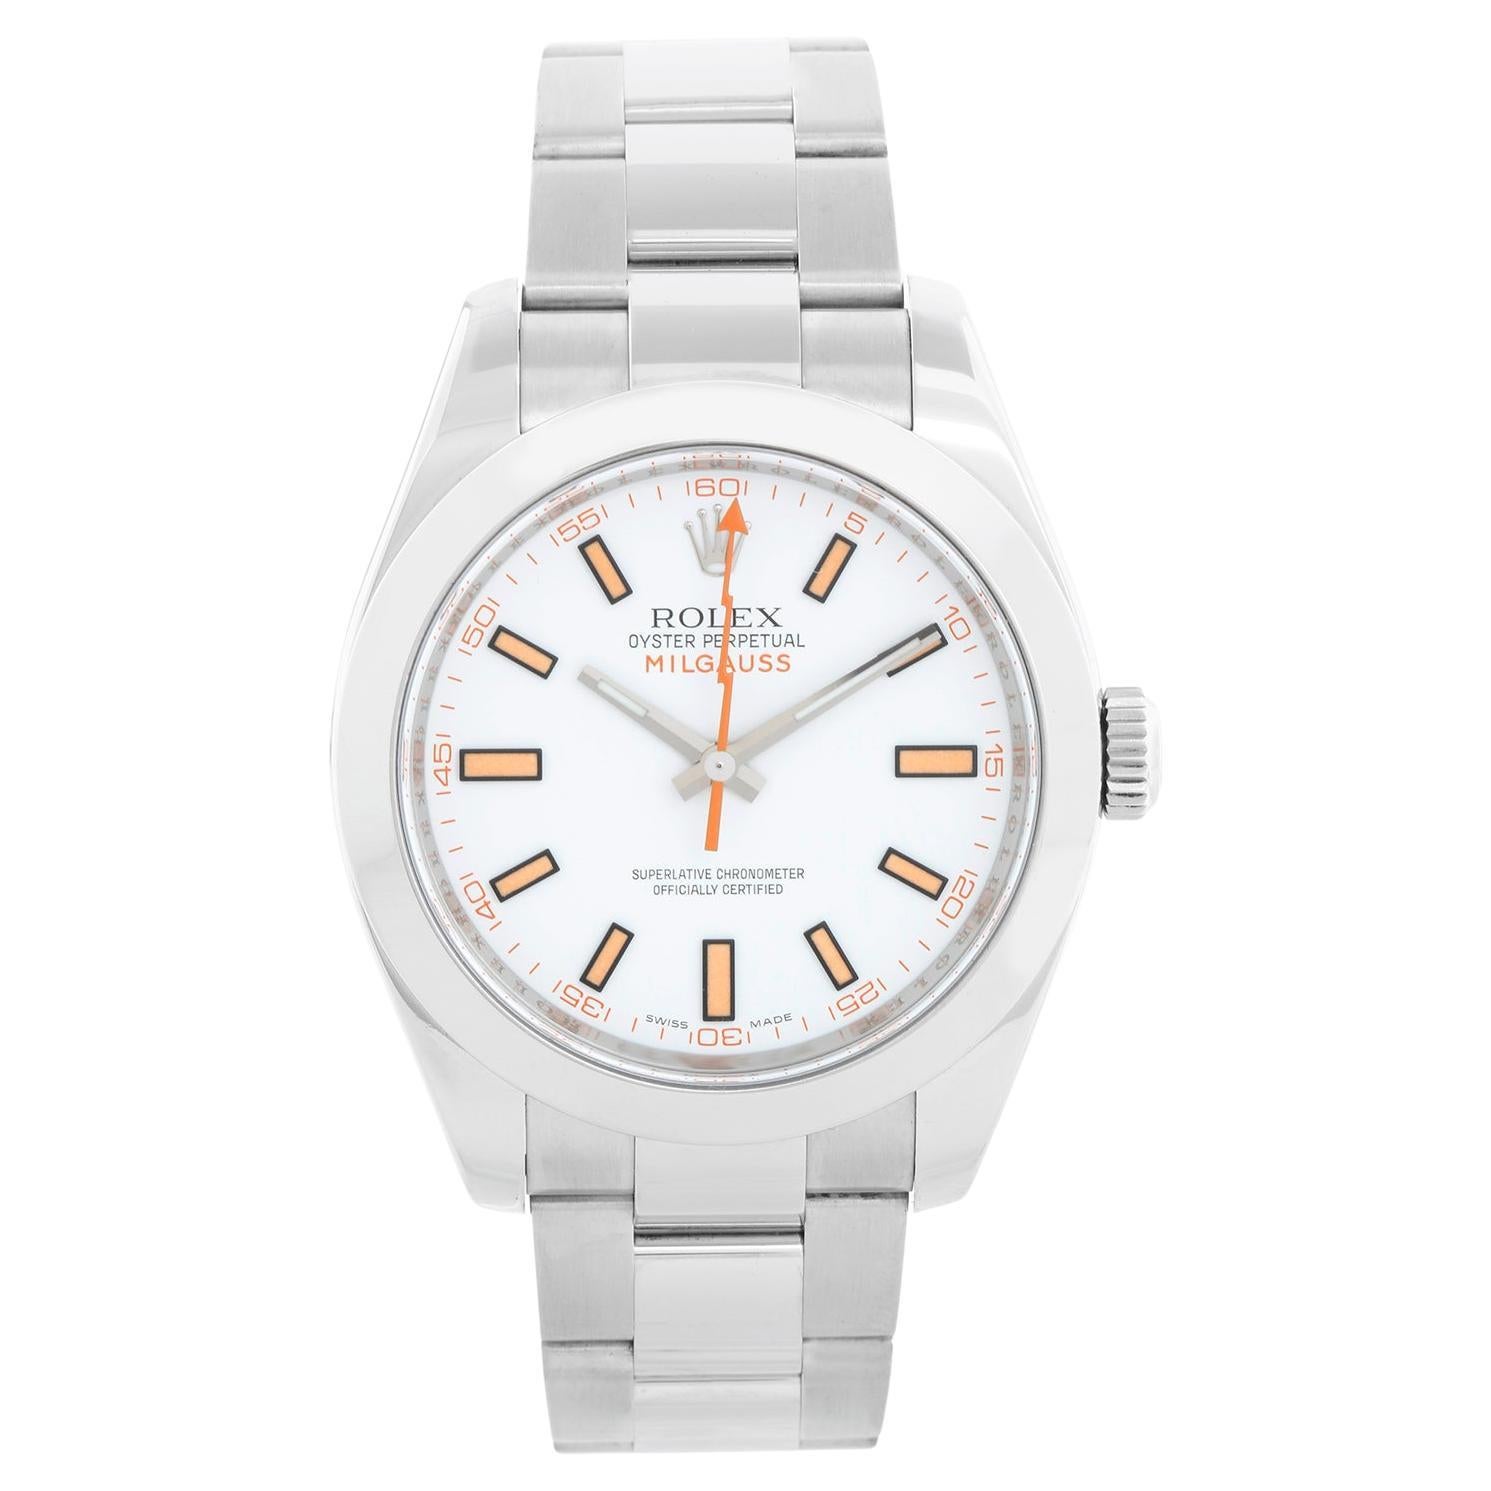 Rolex Milgauss Stainless Steel Men's Watch White Dial 116400 For Sale